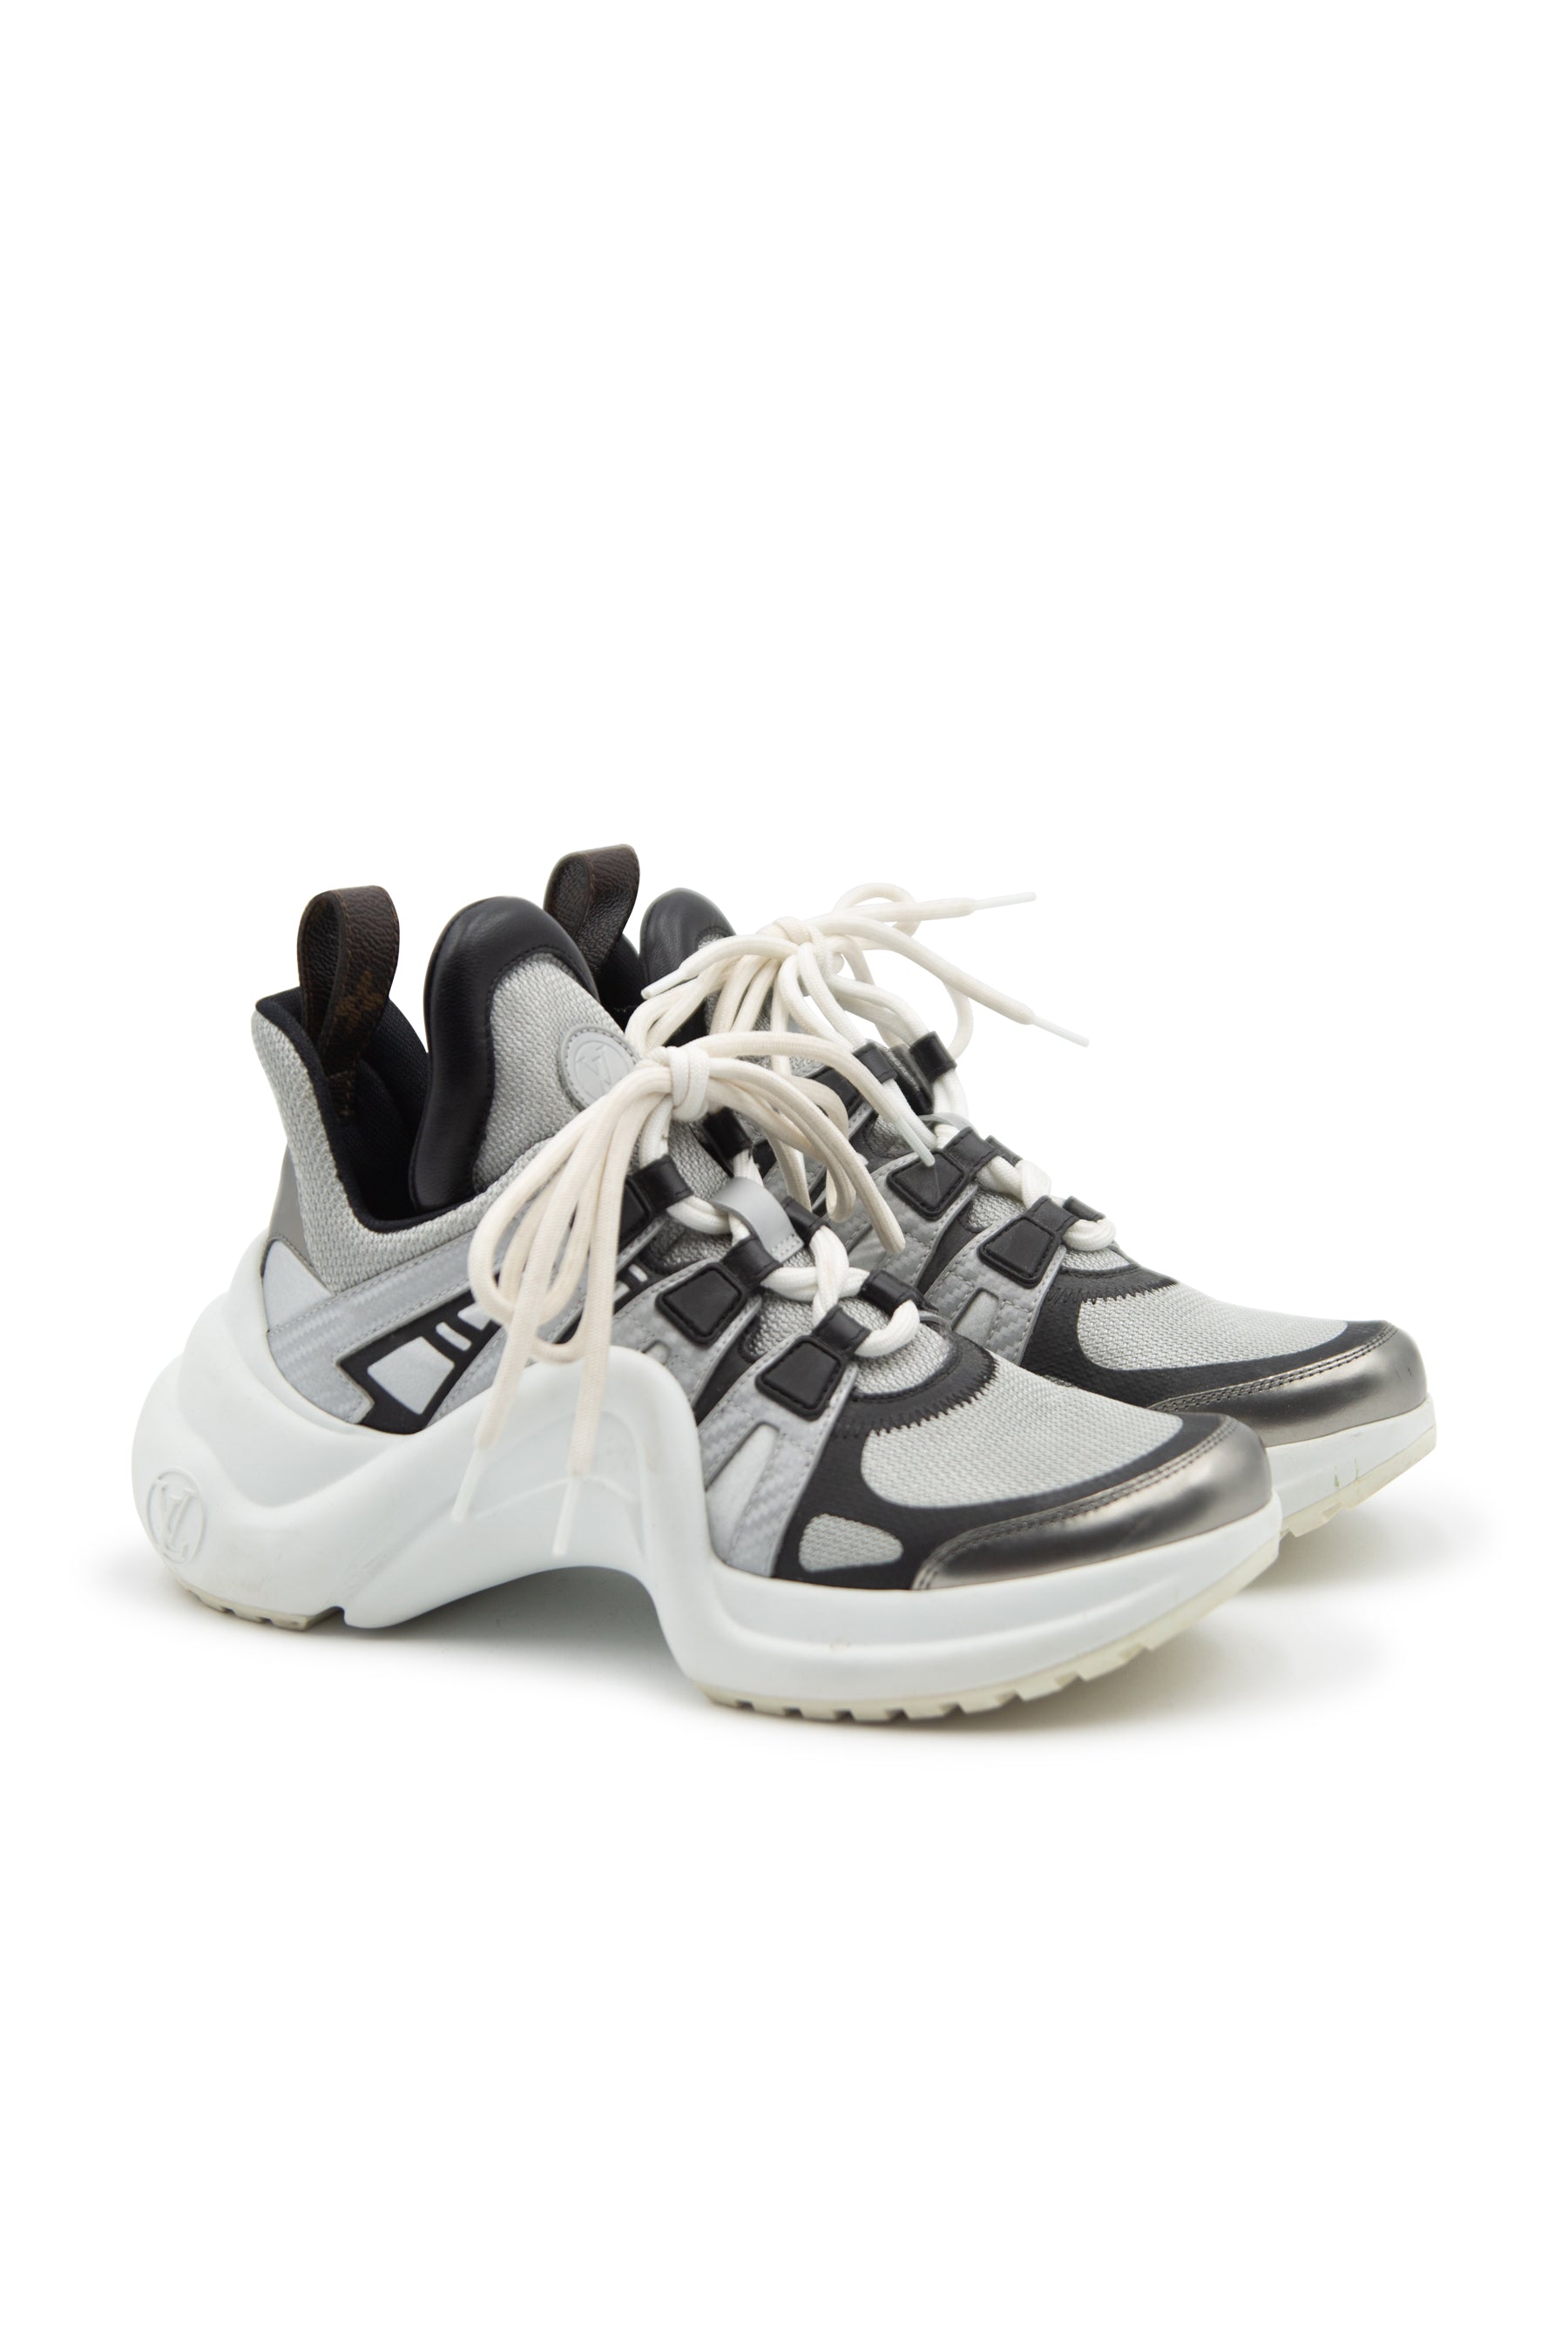 Louis Vuitton Archlight Chunky Sneakers